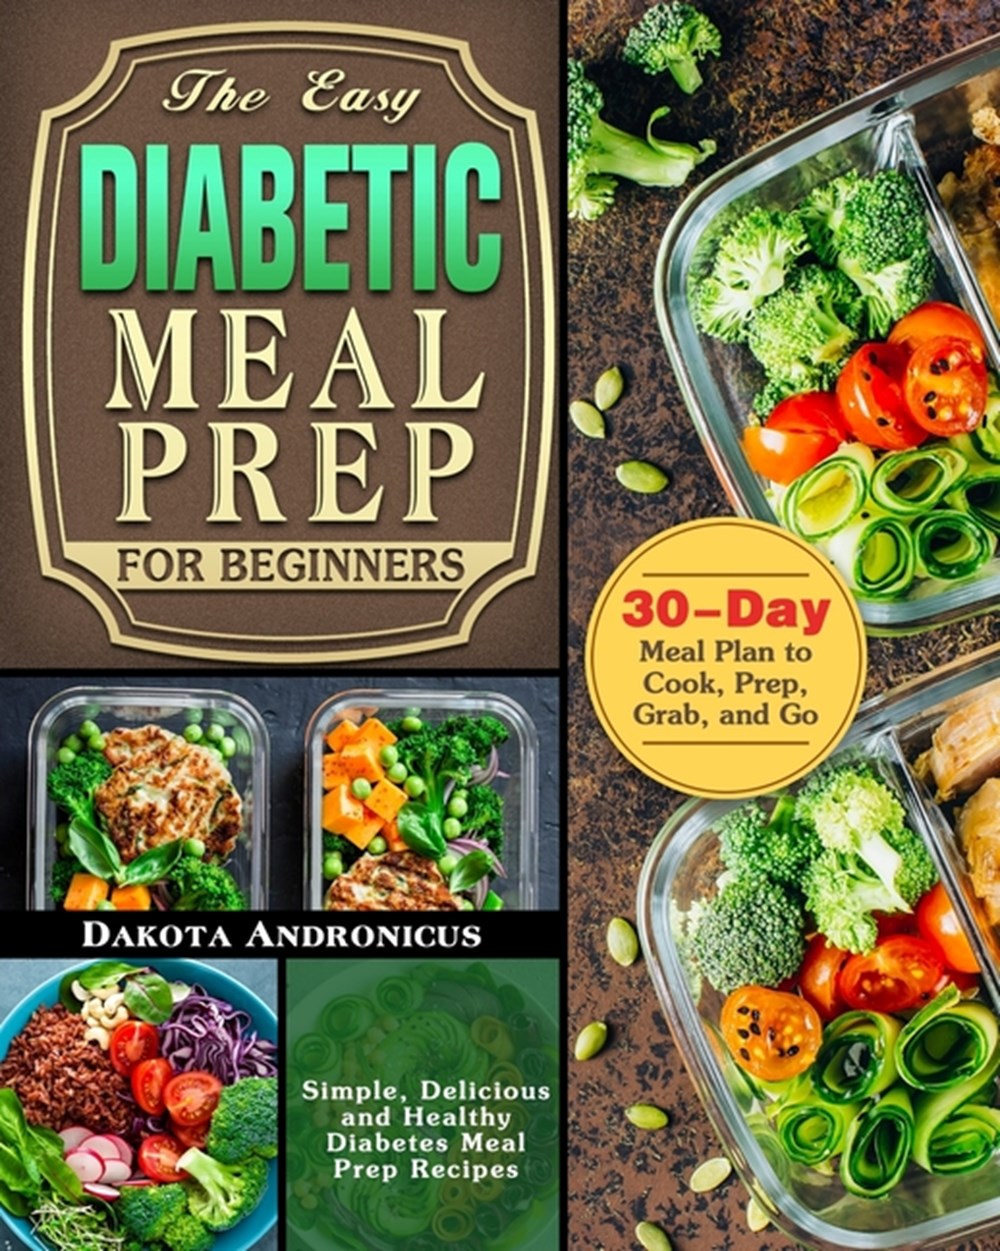 Easy Diabetic Meal Prep for Beginners: Simple, Delicious and Healthy Diabetes Meal Prep Recipes with